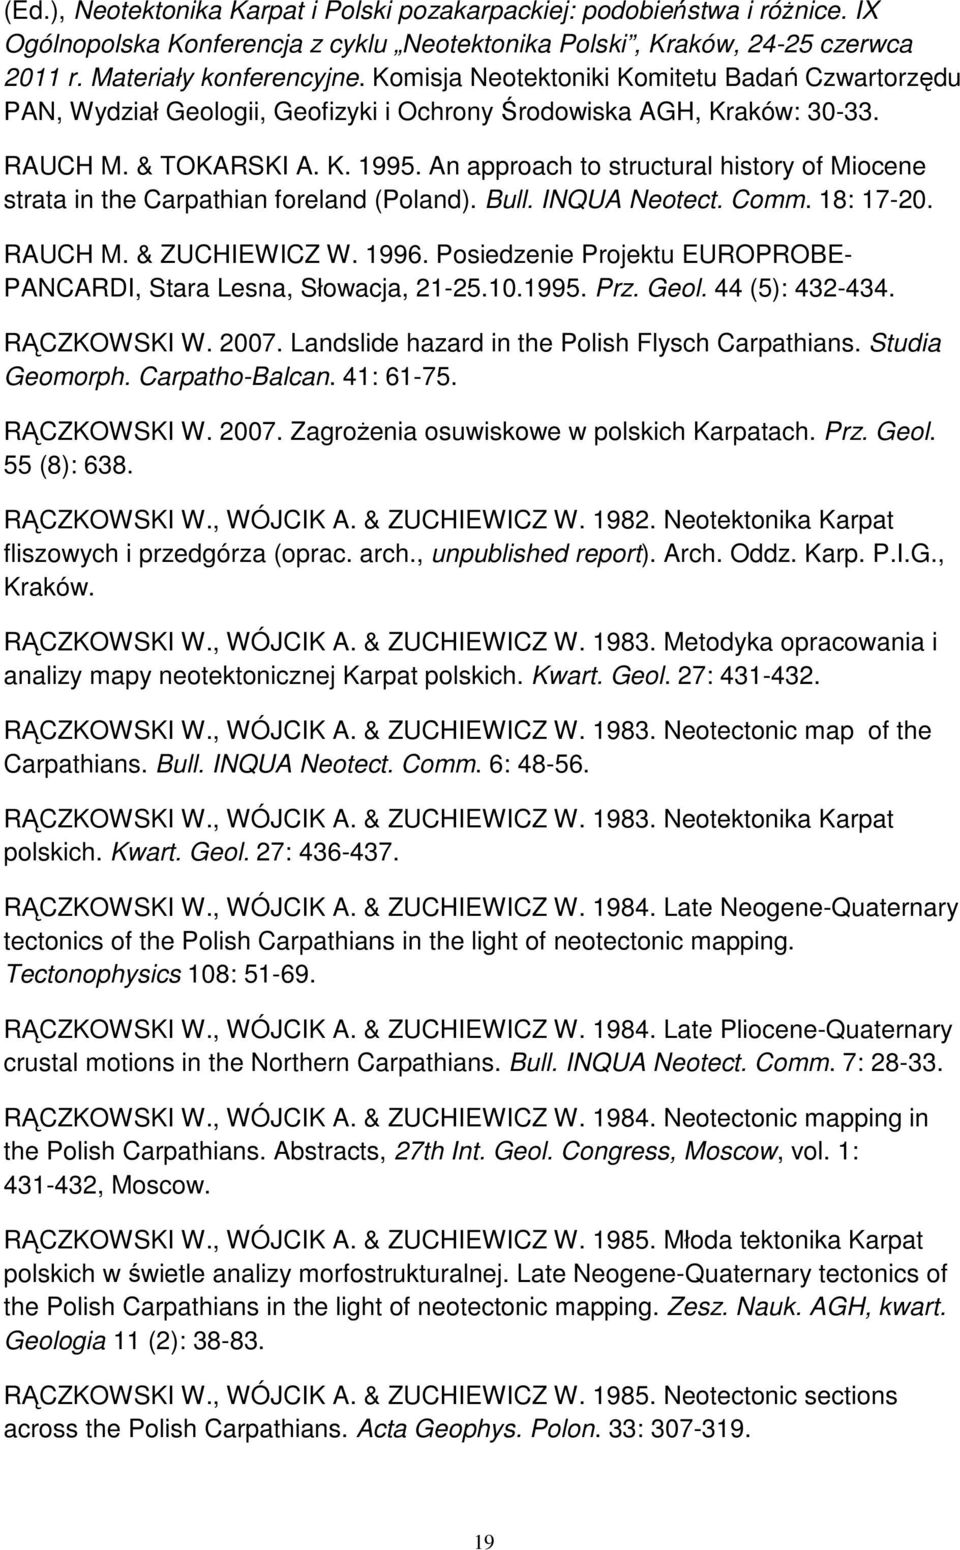 An approach to structural history of Miocene strata in the Carpathian foreland (Poland). Bull. INQUA Neotect. Comm. 18: 17-20. RAUCH M. & ZUCHIEWICZ W. 1996.